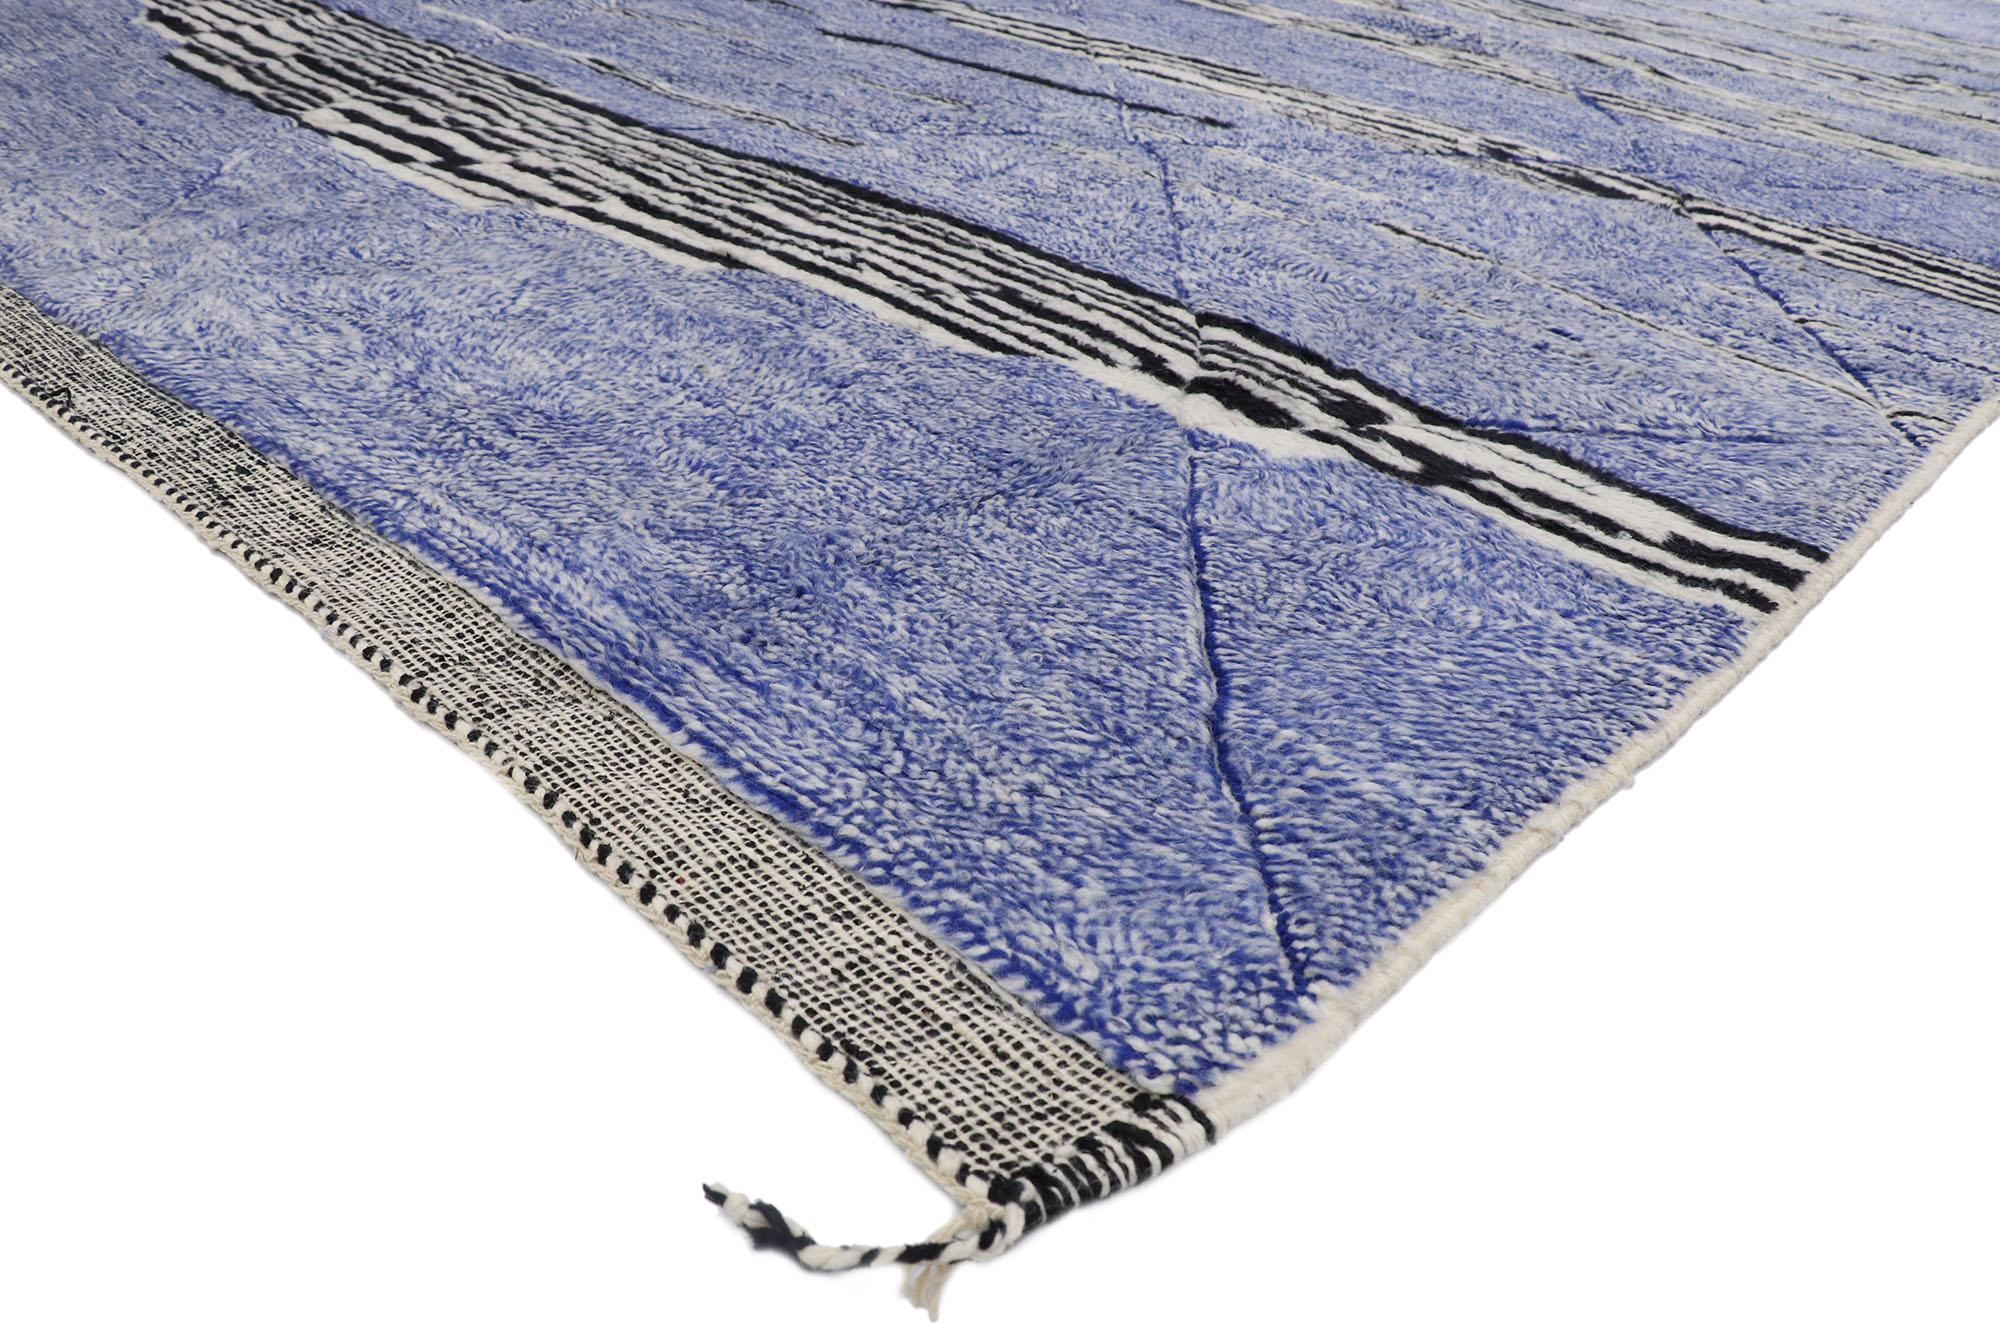 21184 Blue Abstract Berber Moroccan Rug, 09'07 x 13'06. With its visual complexity, incredible detail and texture, this hand knotted wool contemporary Berber Moroccan rug is a captivating vision of woven beauty. It features carved chevron lines